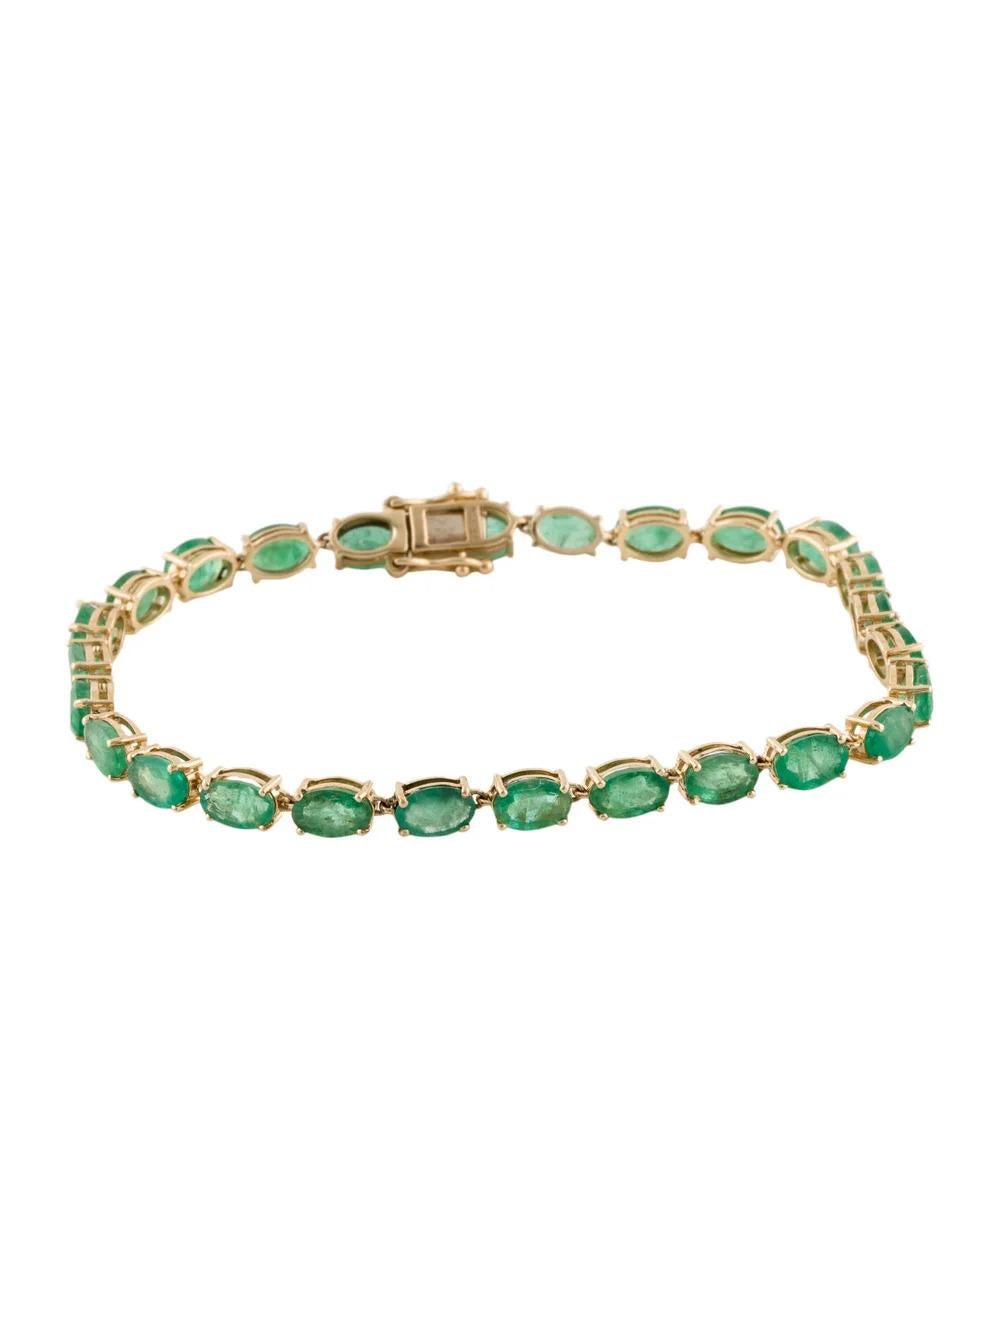 Elevate your ensemble with this exquisite 14K Yellow Gold Bracelet featuring a breathtaking 10.40 Carat Faceted Oval Emerald, radiating timeless beauty and sophistication.

Specifications:

* Metal Type: 14K Yellow Gold
* Gemstone:
* Emerald
* Carat